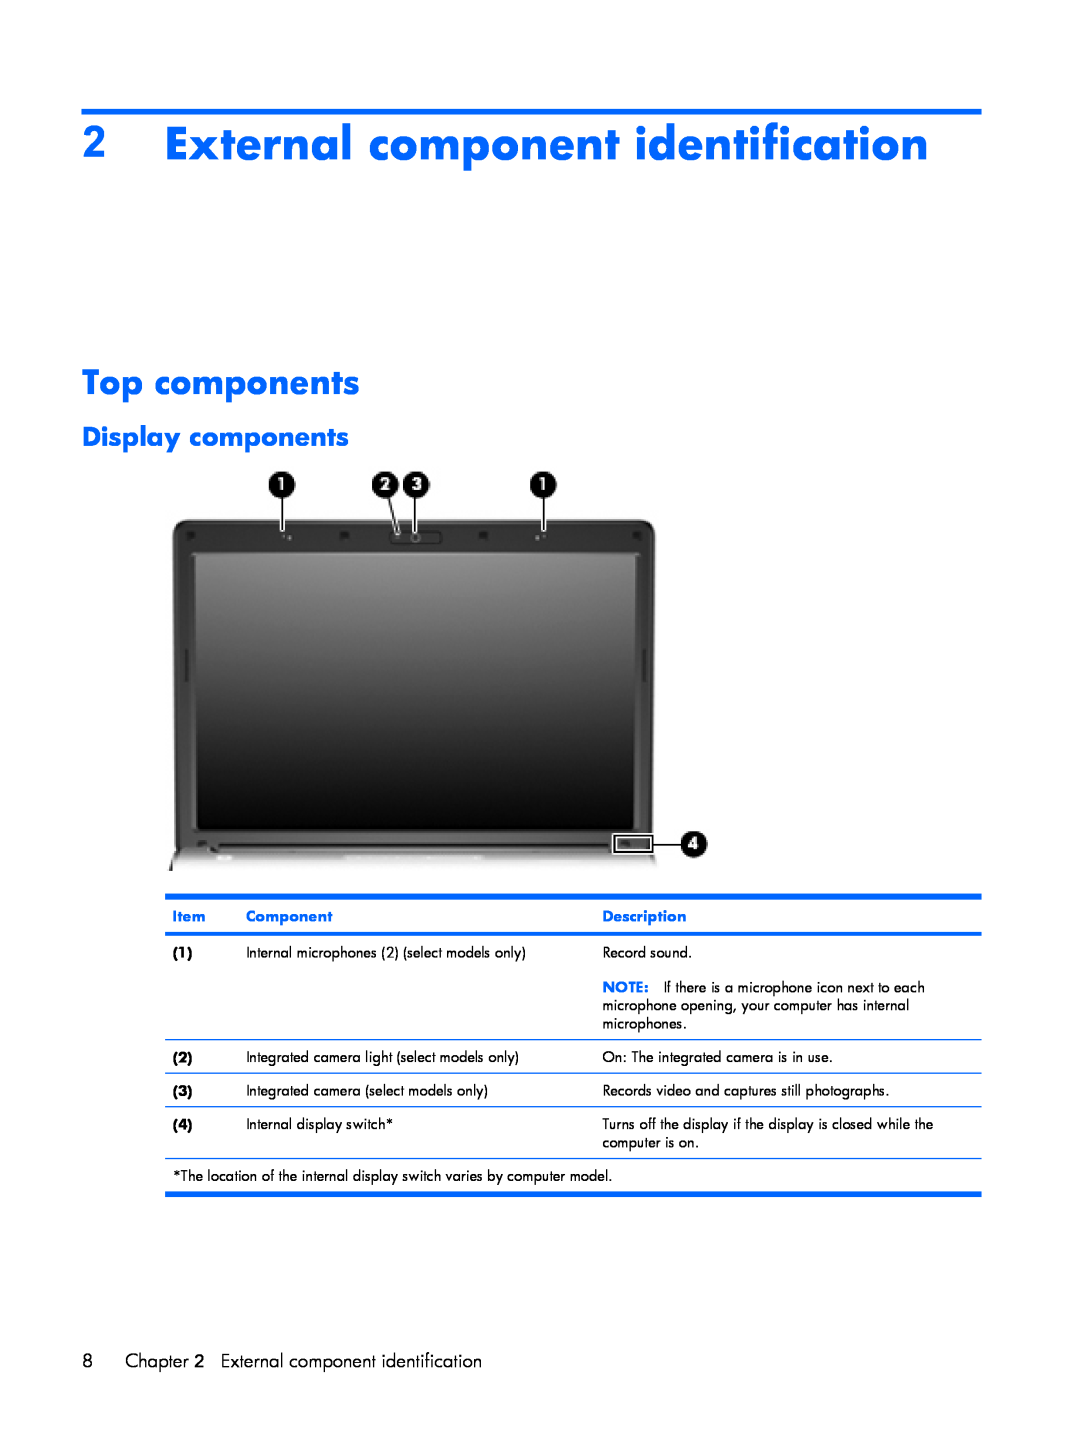 HP V3907TU, V3523TU, V3930TU, V3931TU, V3929TU, V3928TU External component identification, Top components, Display components 